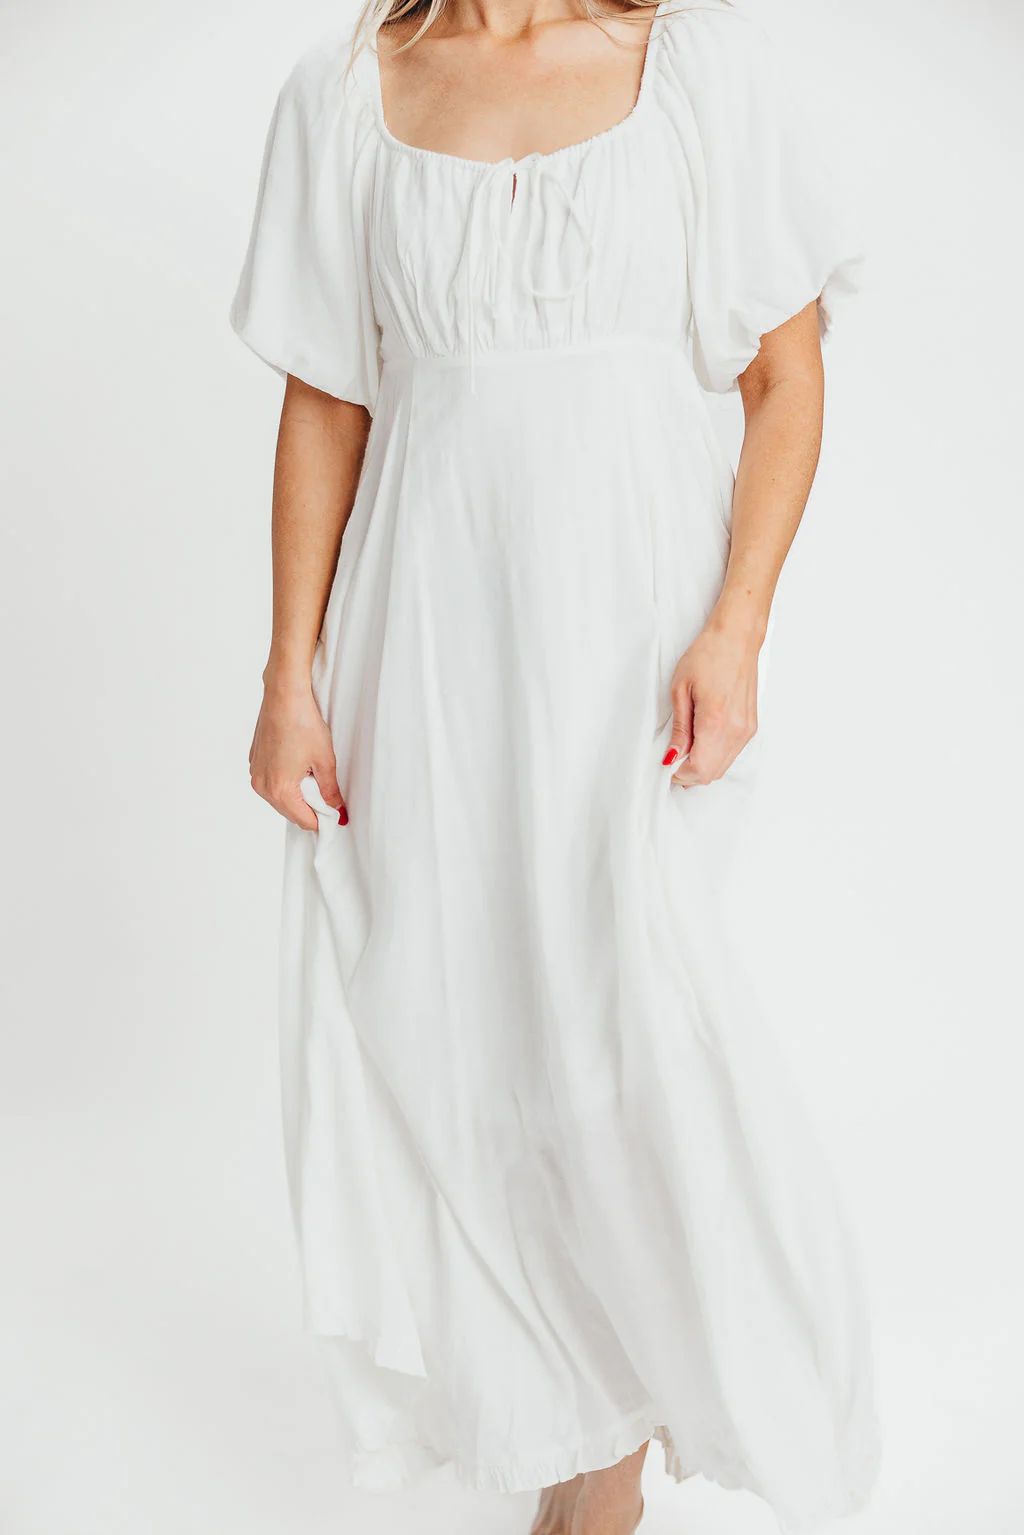 Chesley Puffed Sleeve Maxi Dress with Front Tie Detail in White - Bump | Worth Collective